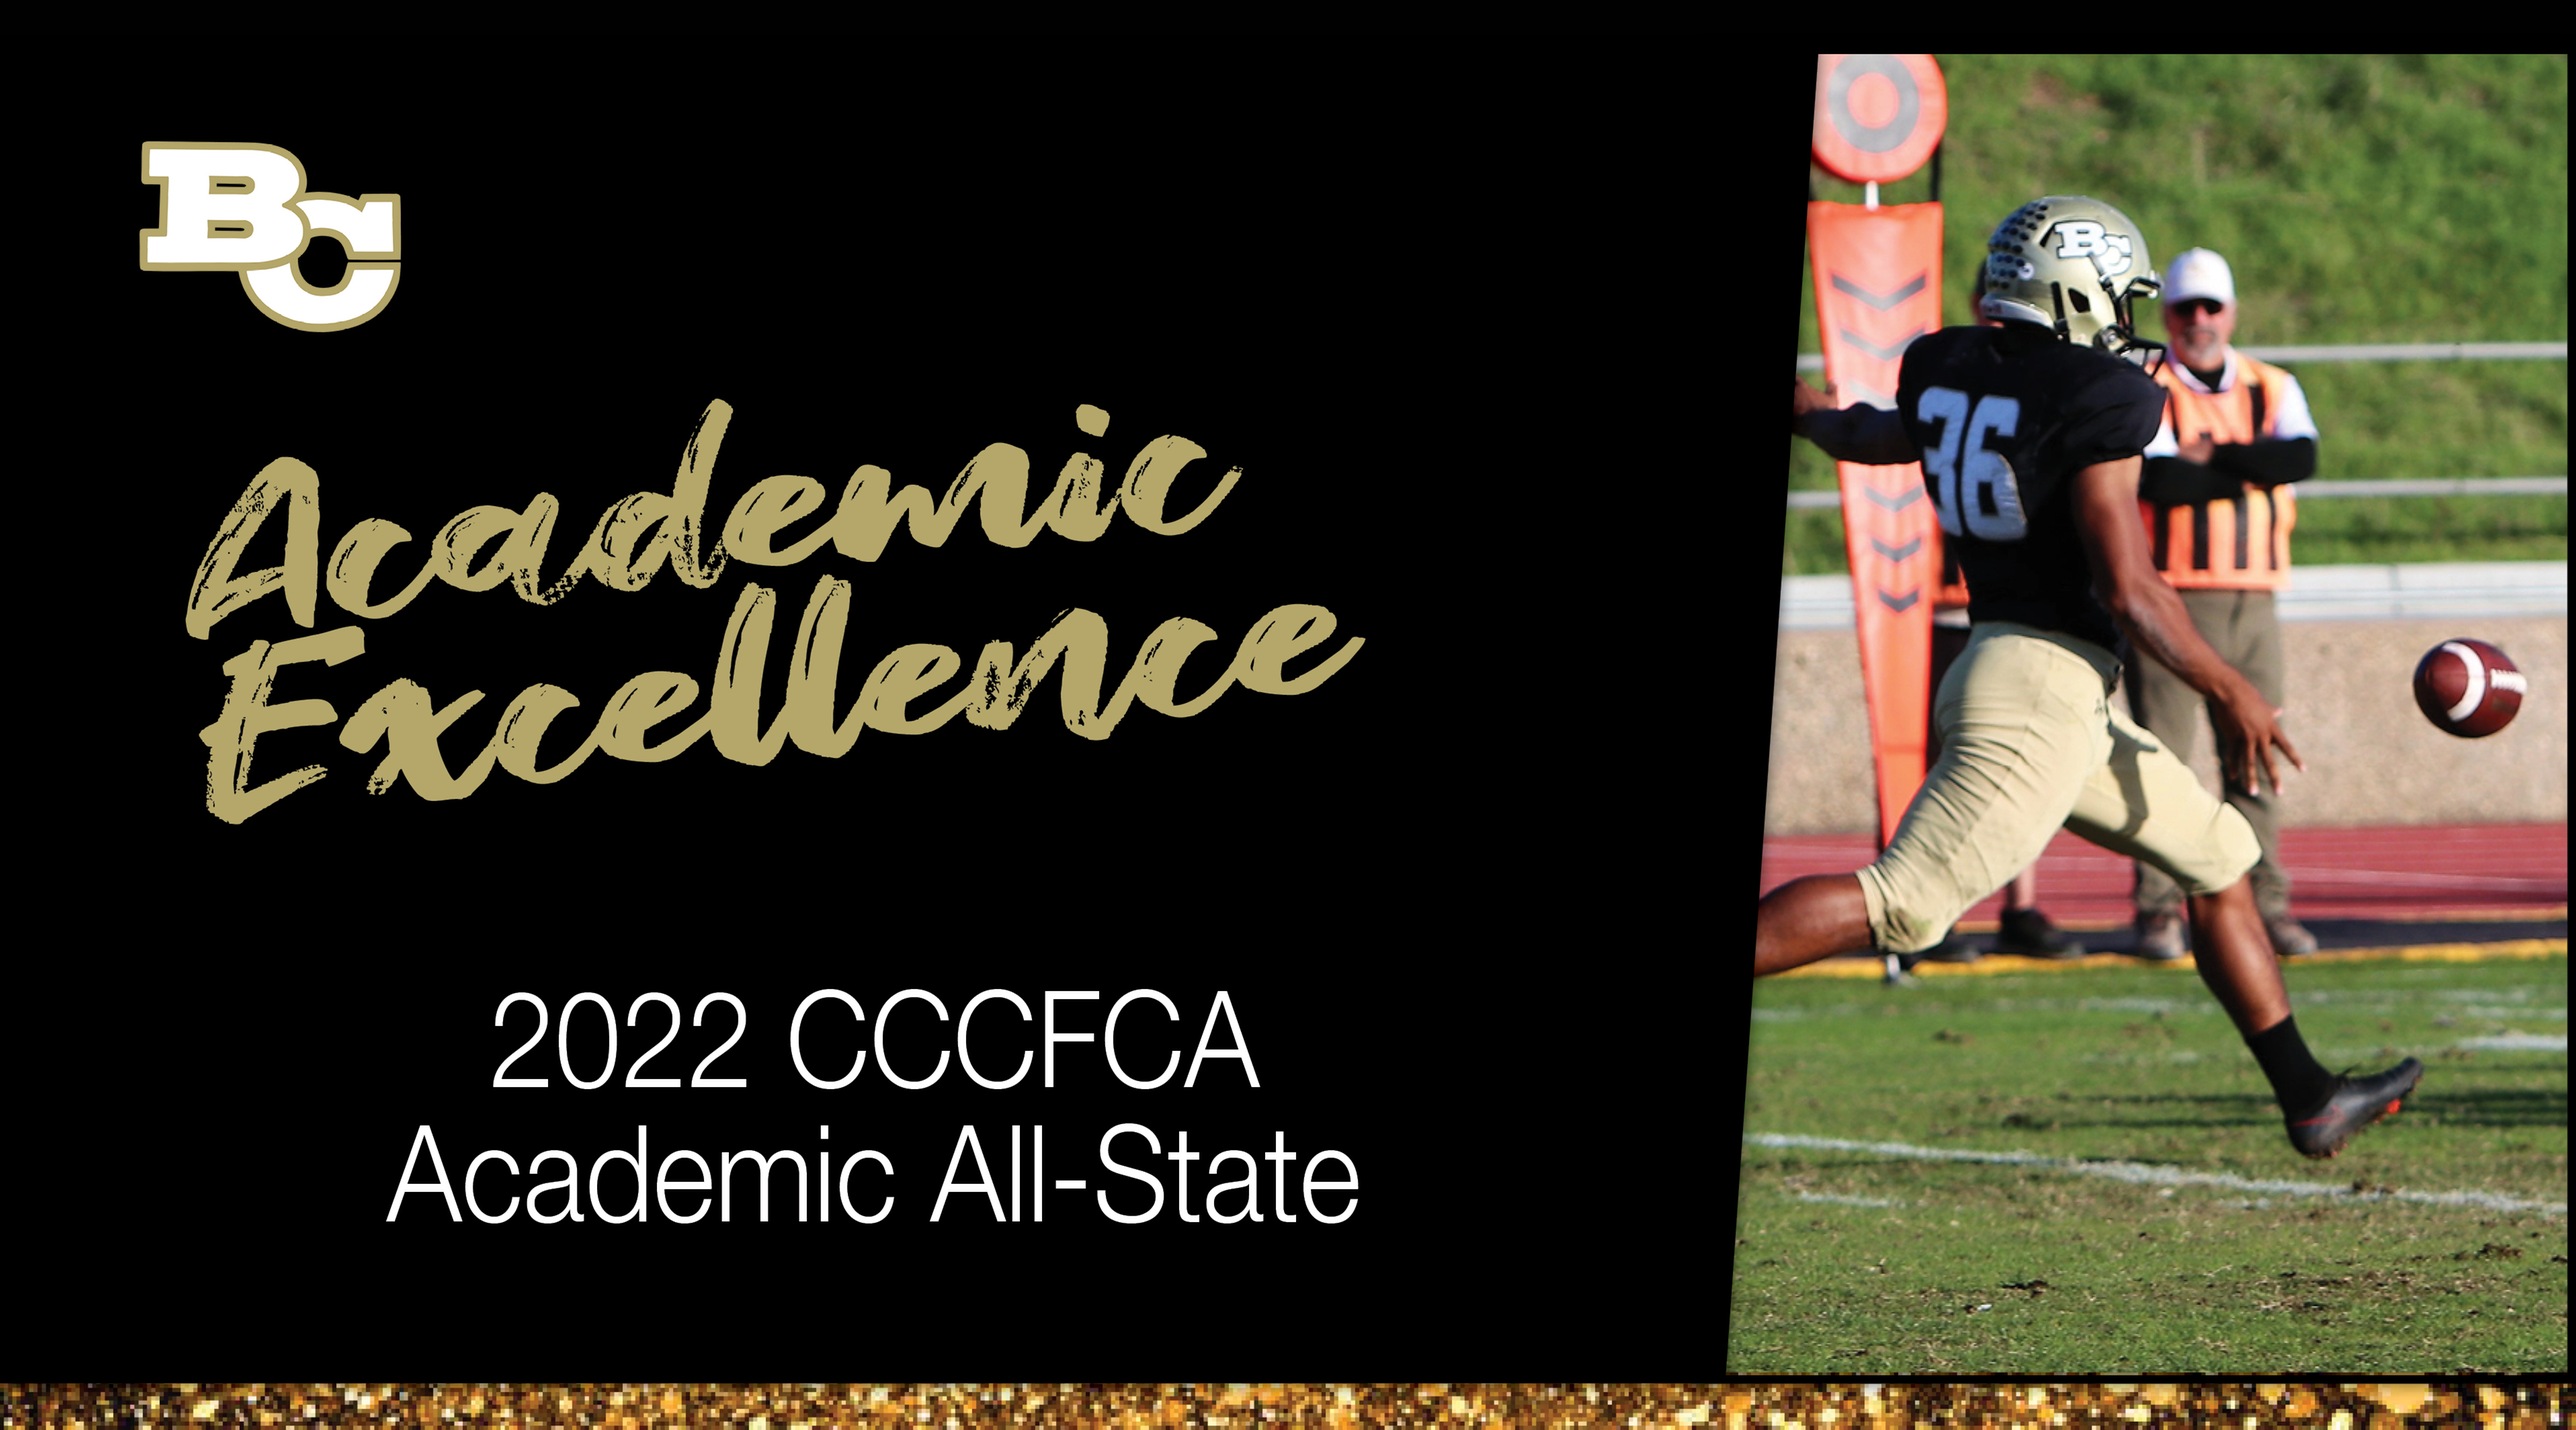 Four Student-Athletes Earn Academic All-State Honors